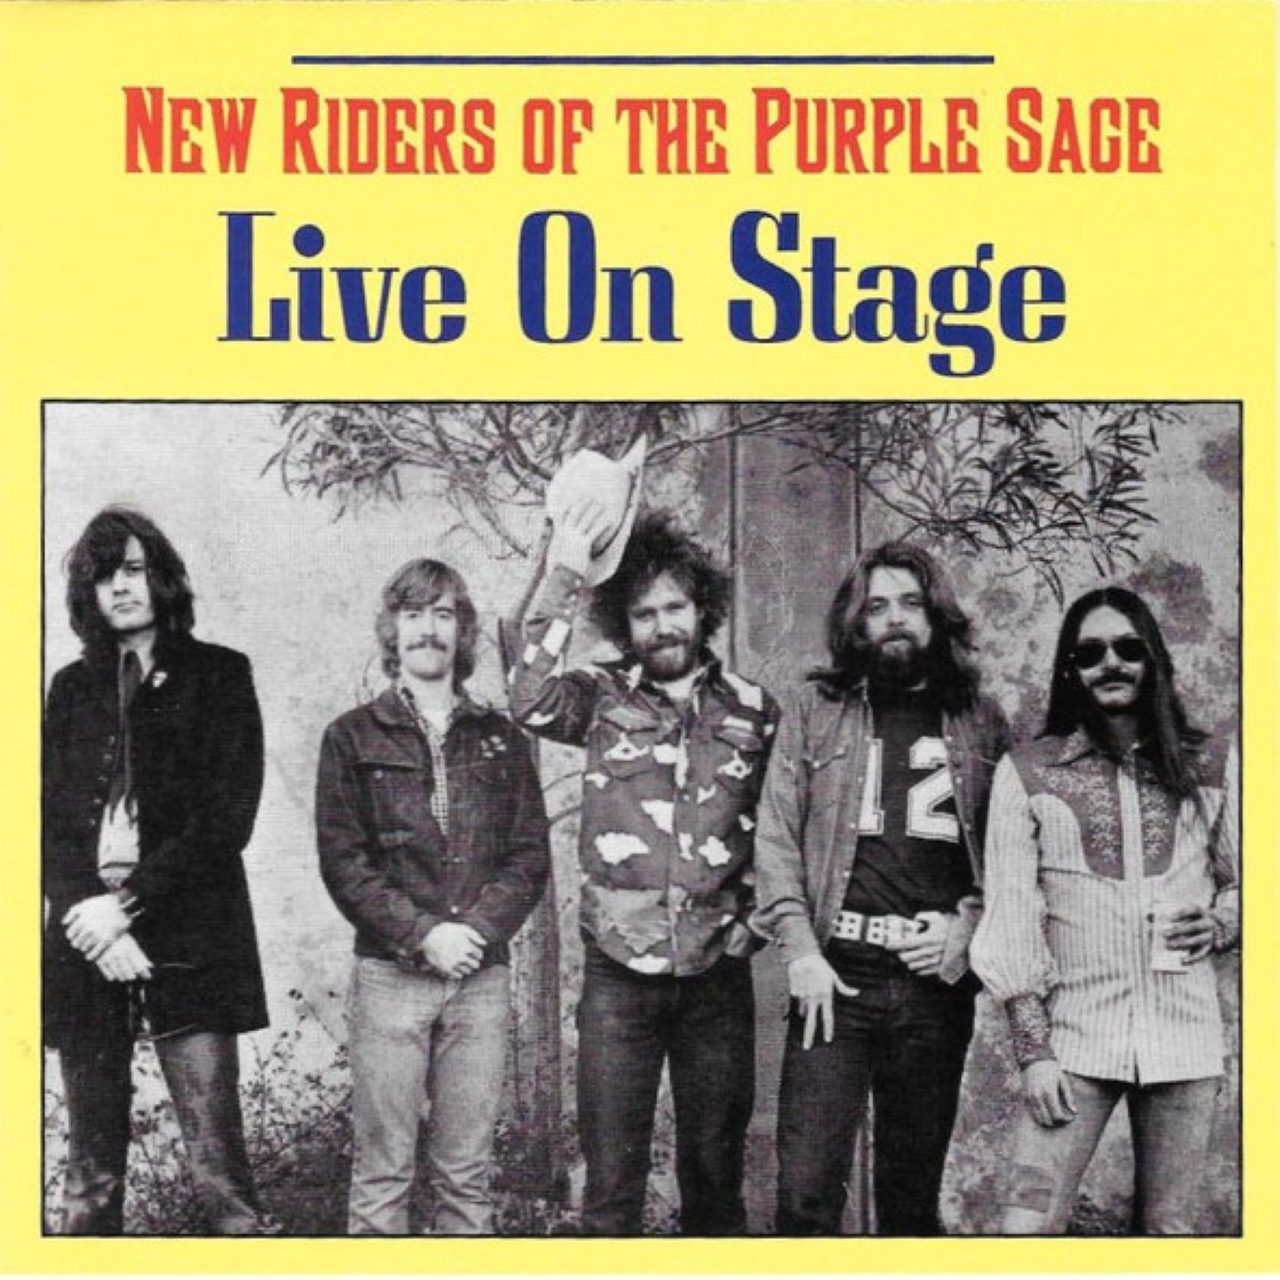 New Riders Of The Purple Sage - Live On Stage cover album